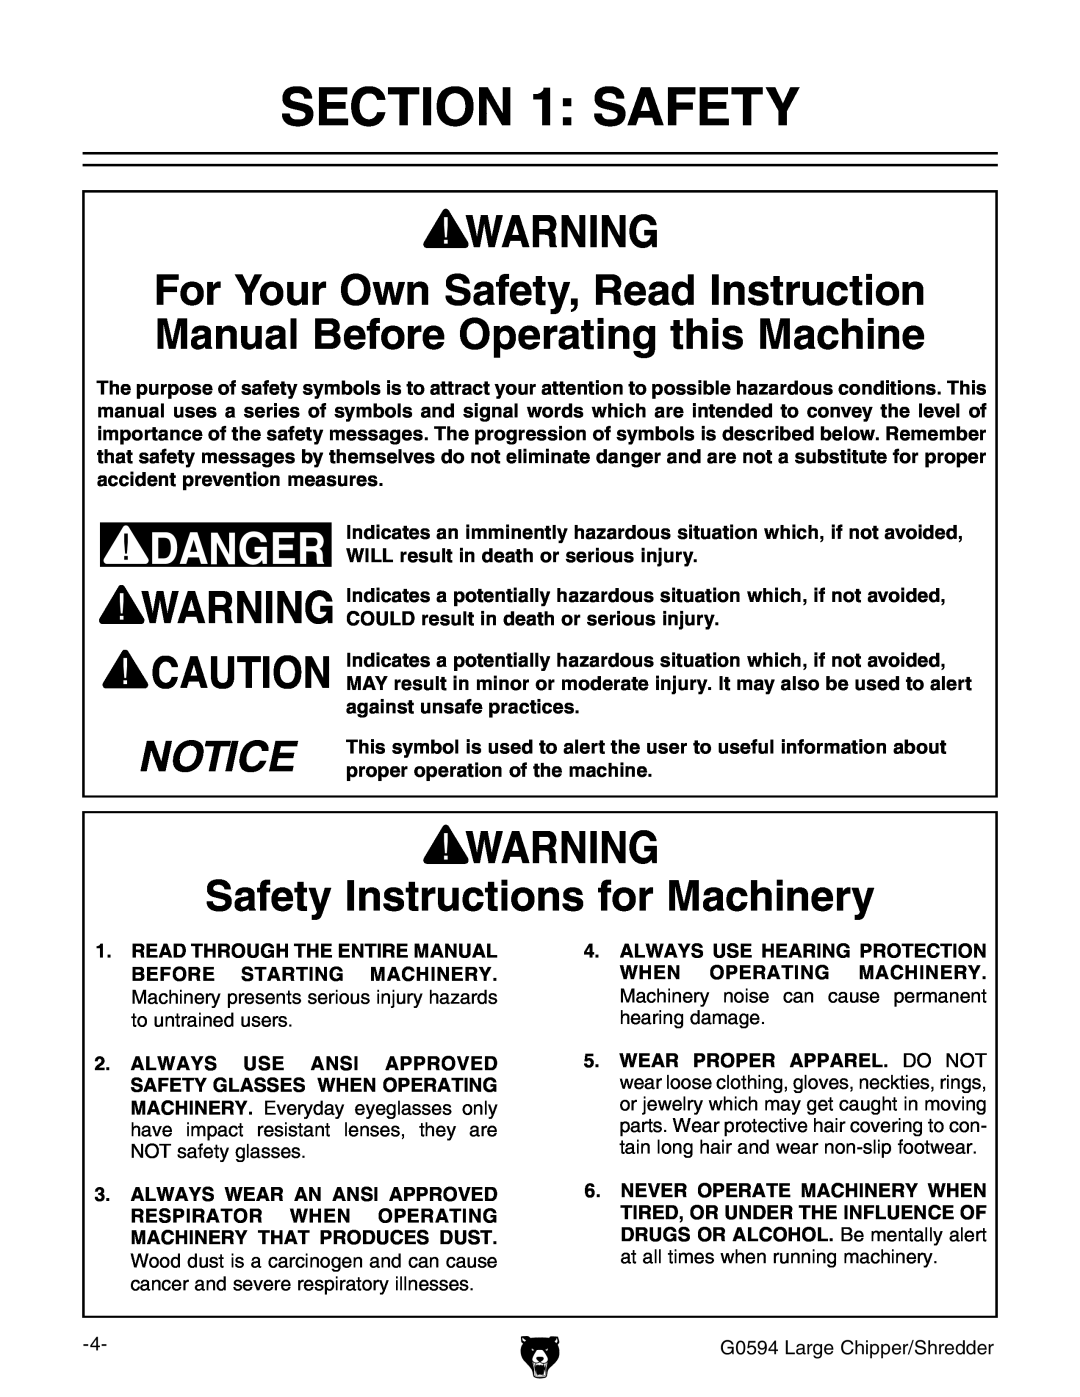 Grizzly G0594 Safety Instructions for Machinery, WILL result in death or serious injury, against unsafe practices 